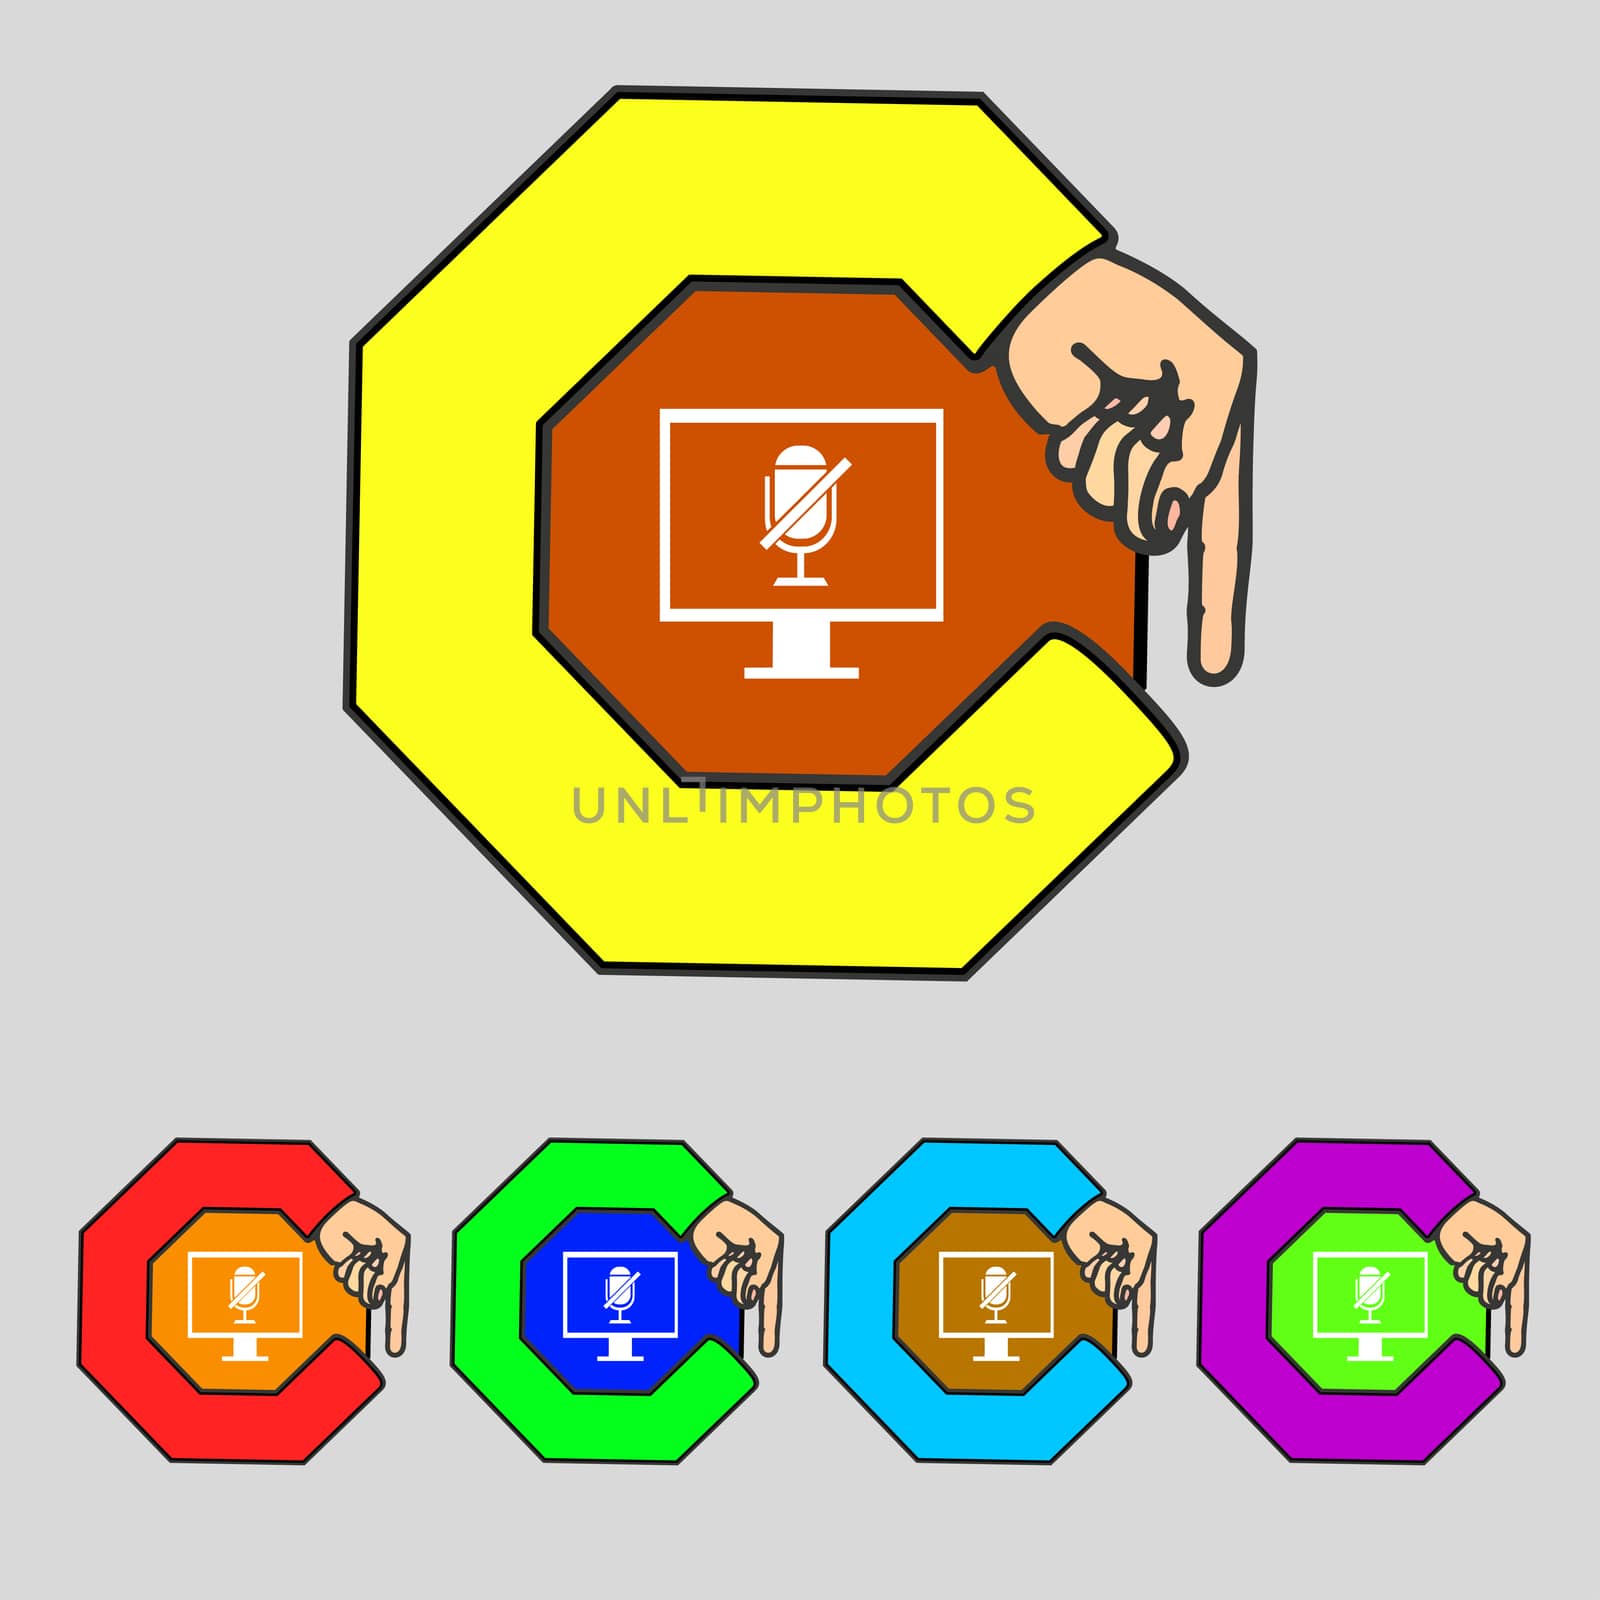 No Microphone sign icon. Speaker symbol. Set colourful buttons. illustration